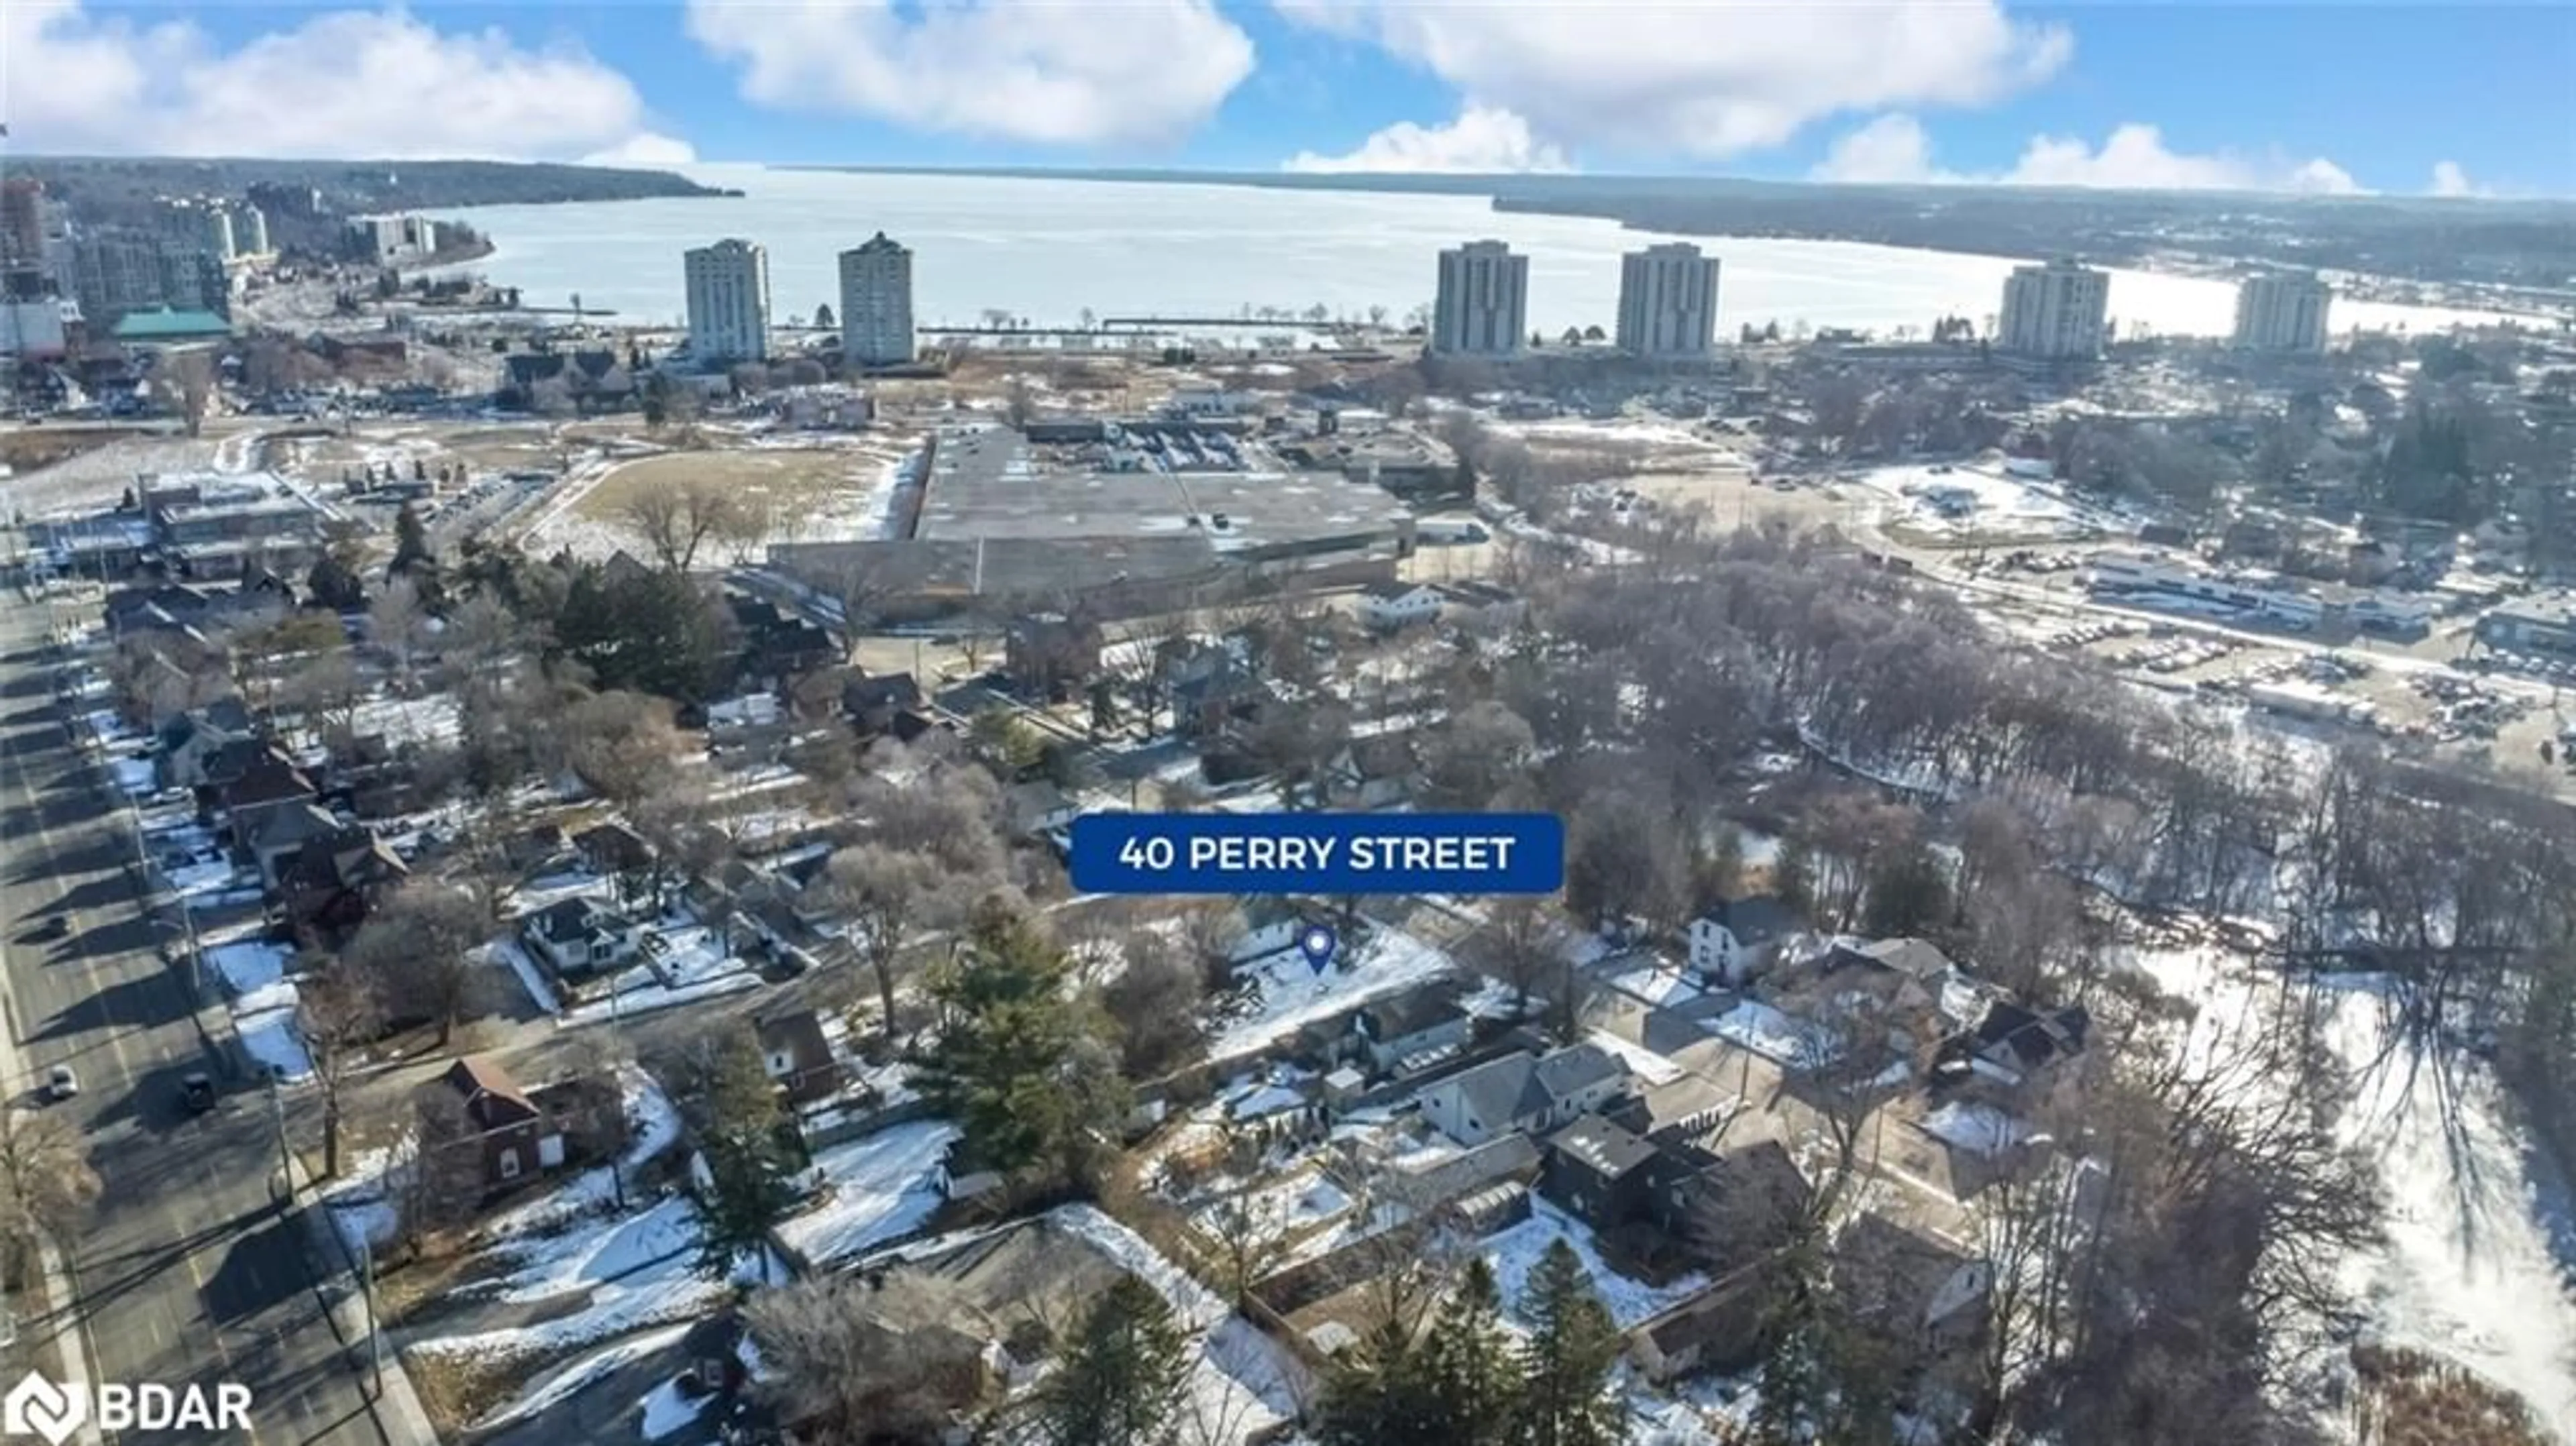 Lakeview for 40 Perry St, Barrie Ontario L4N 2G3